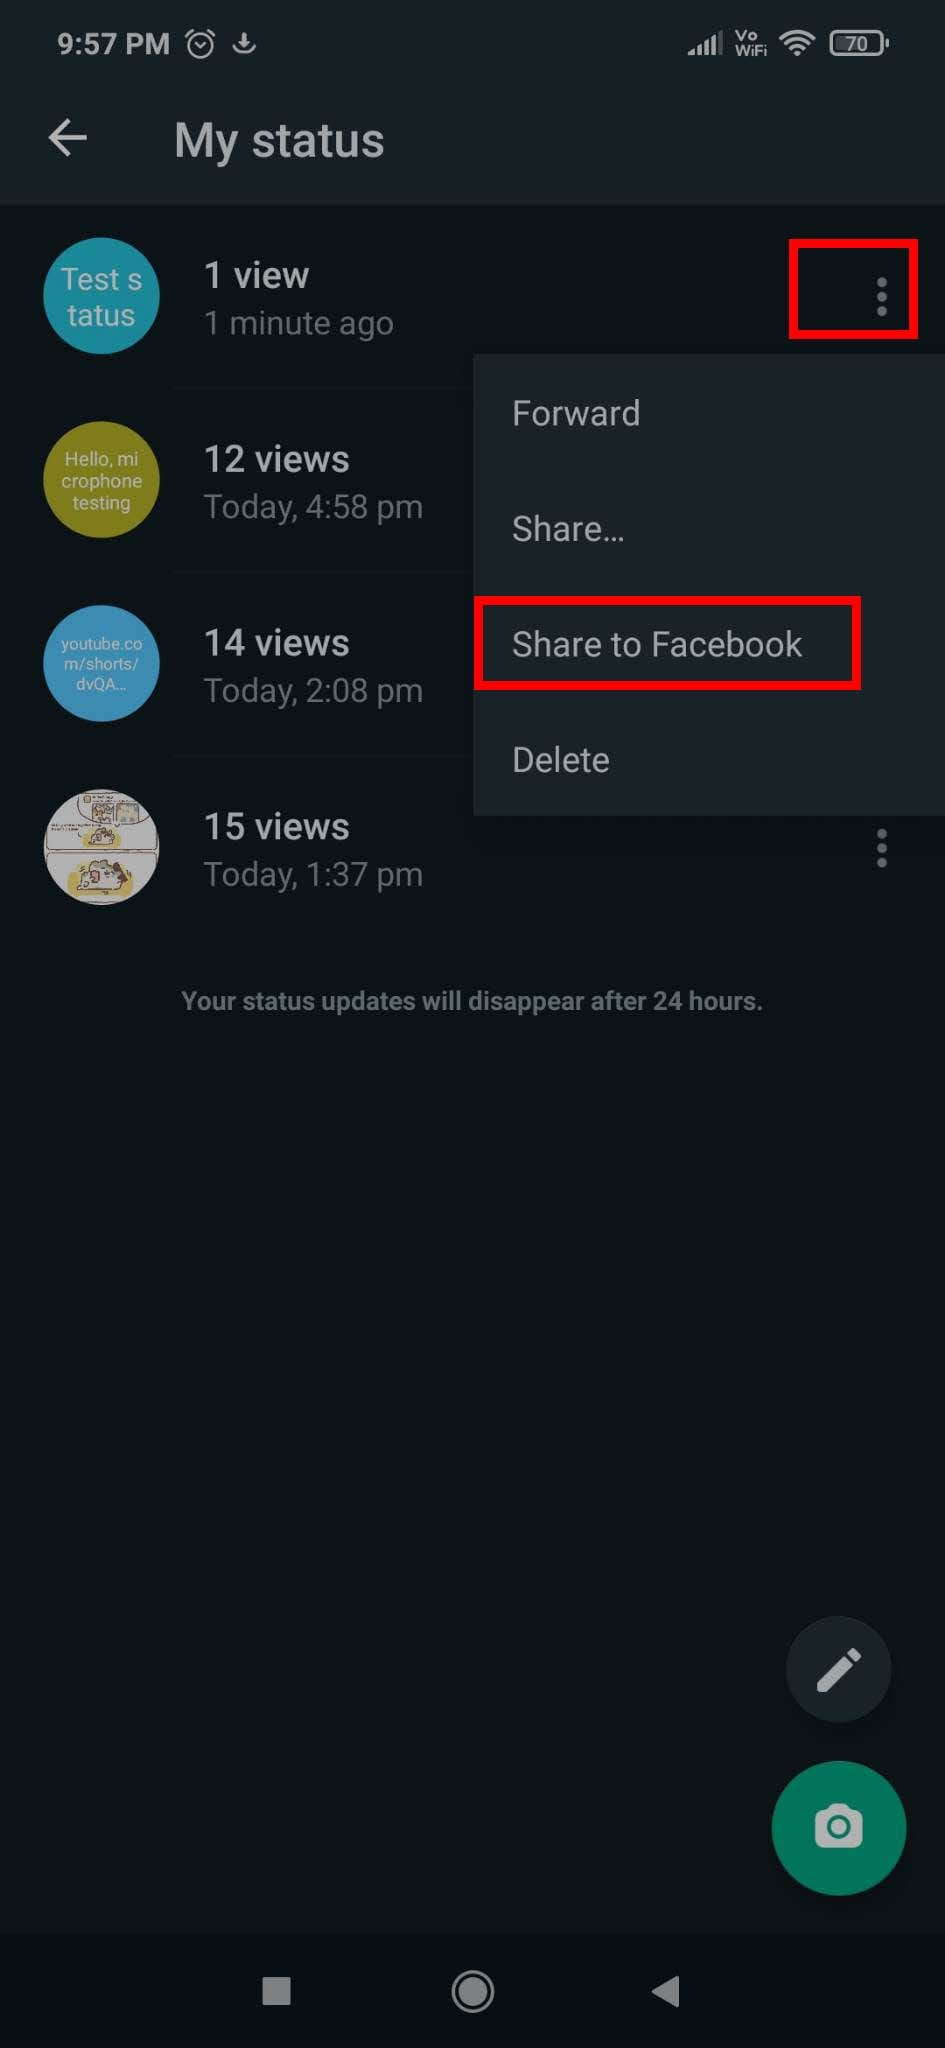 How to Share WhatsApp Status to Facebook Story for old WhatsApp statuses